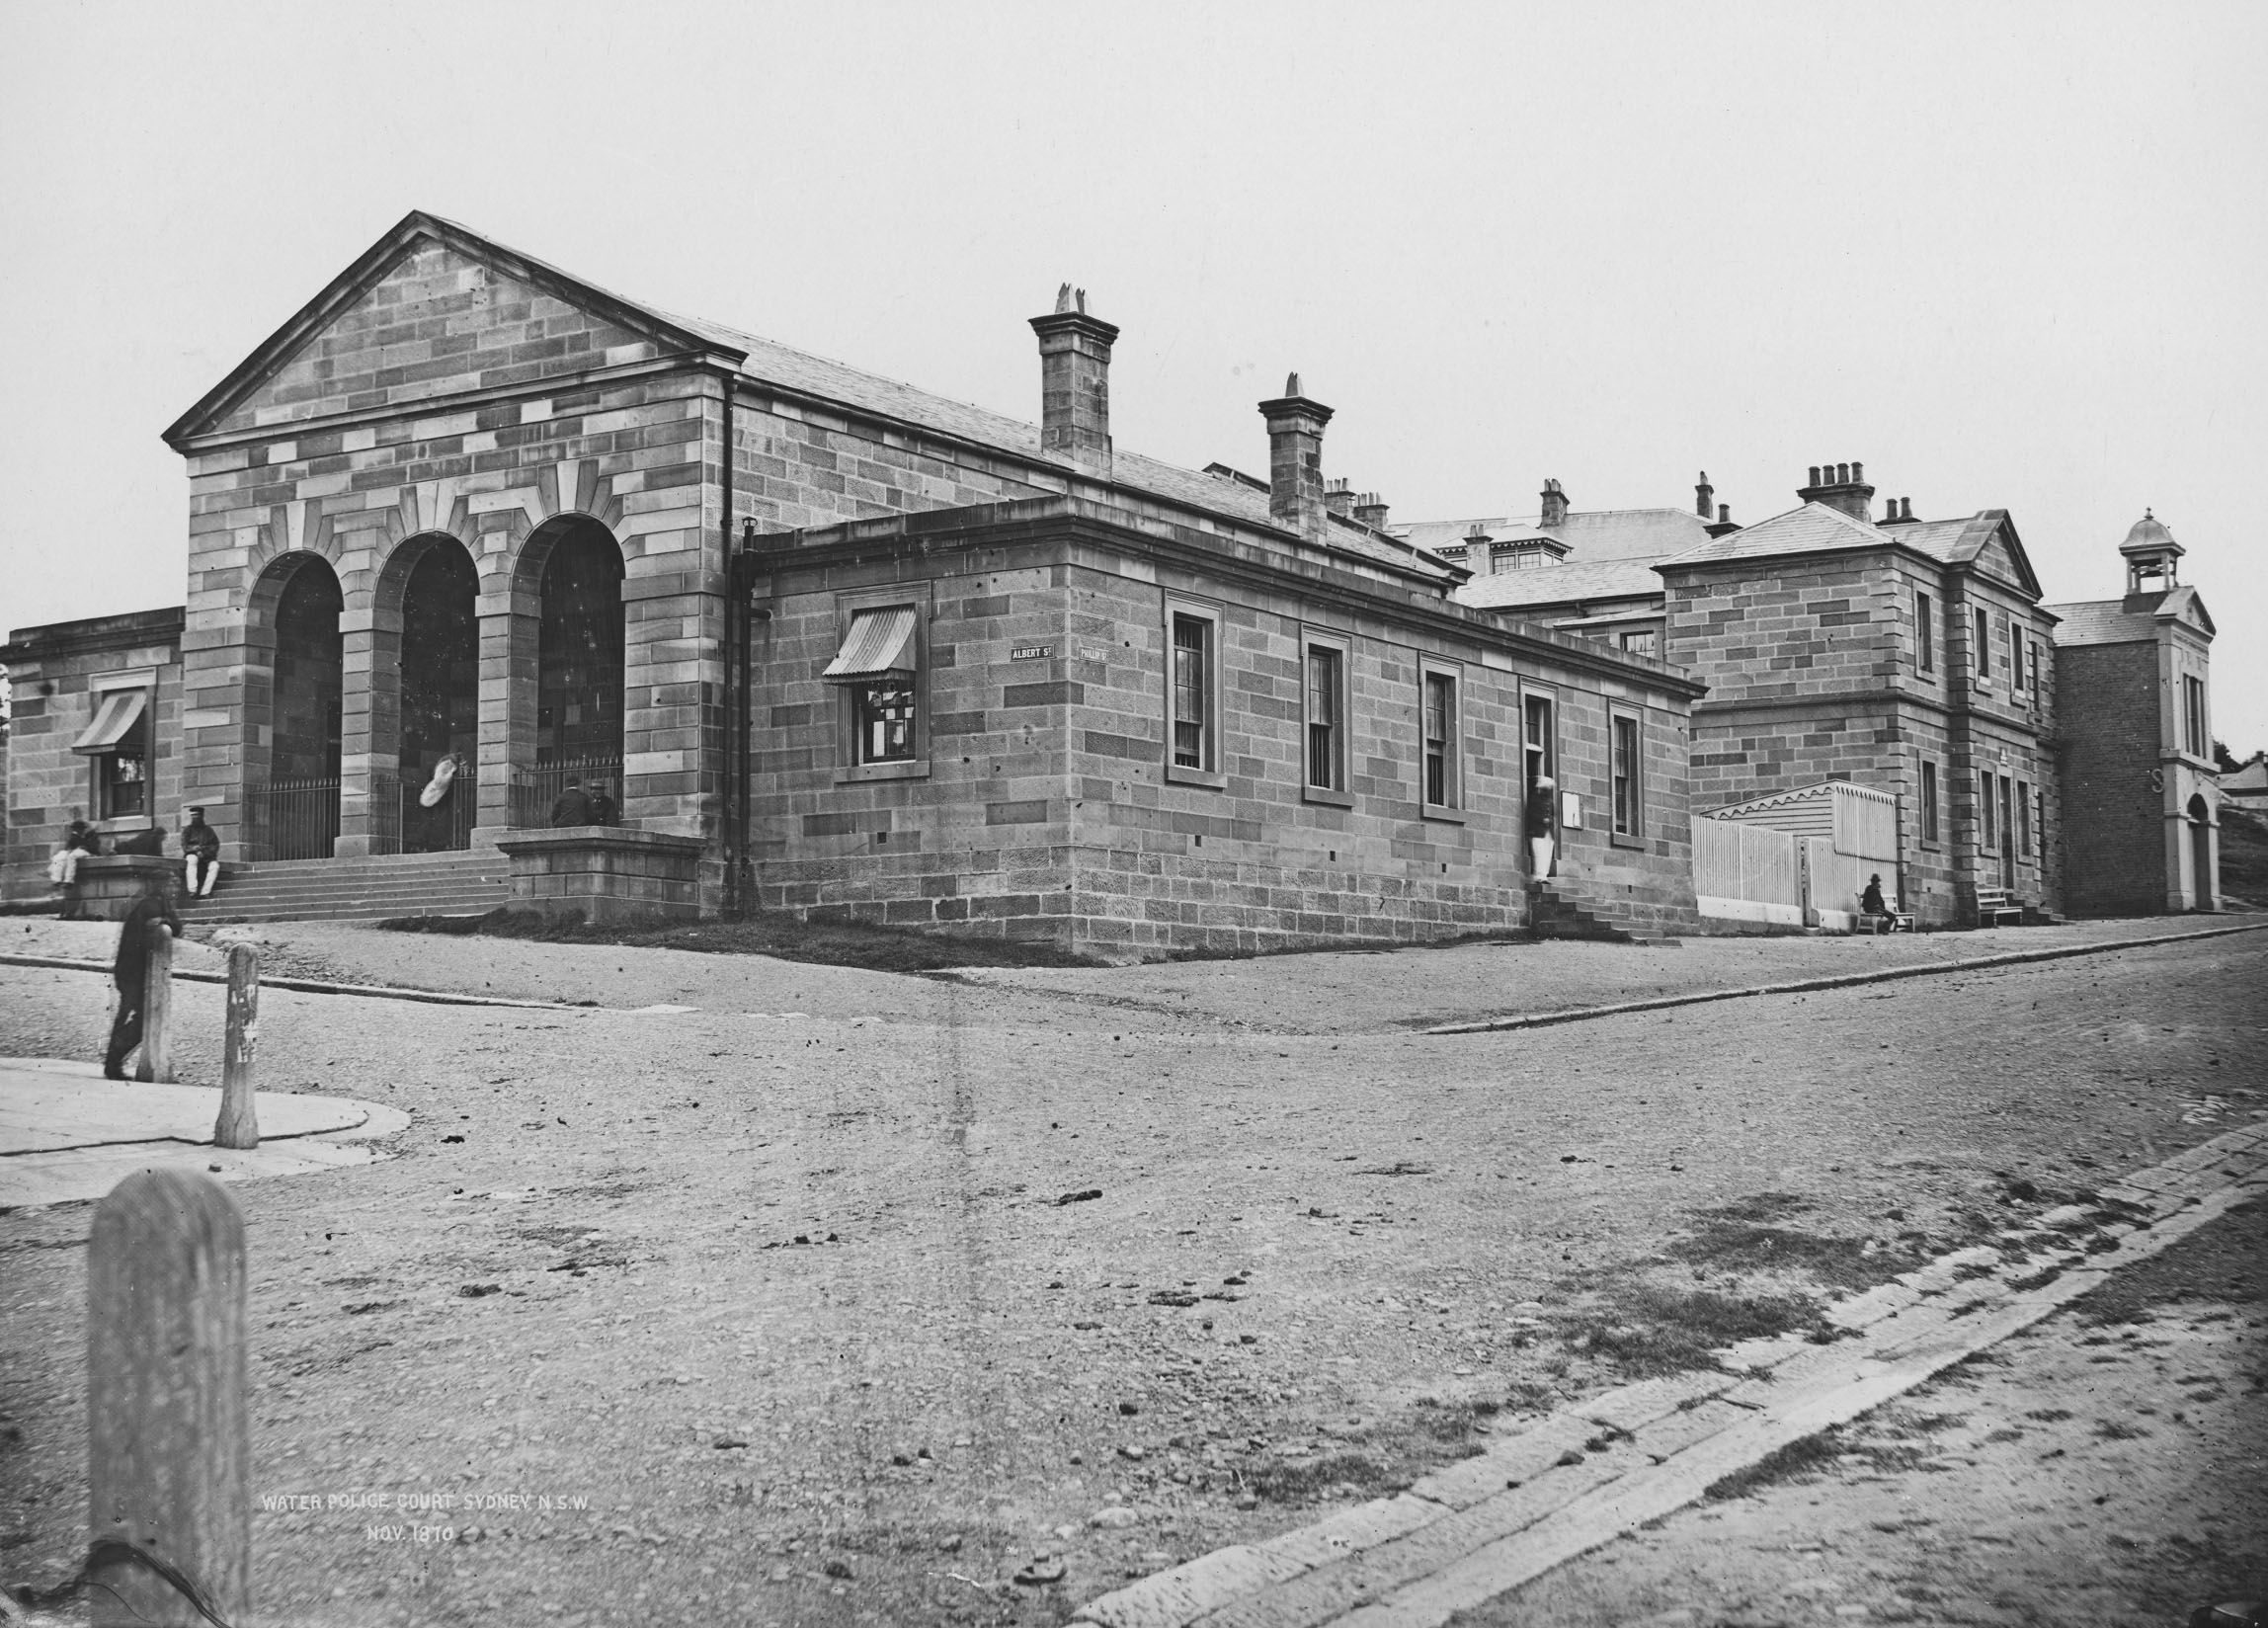 Black and white image of a sandstone building. A man can be seen in the foreground.